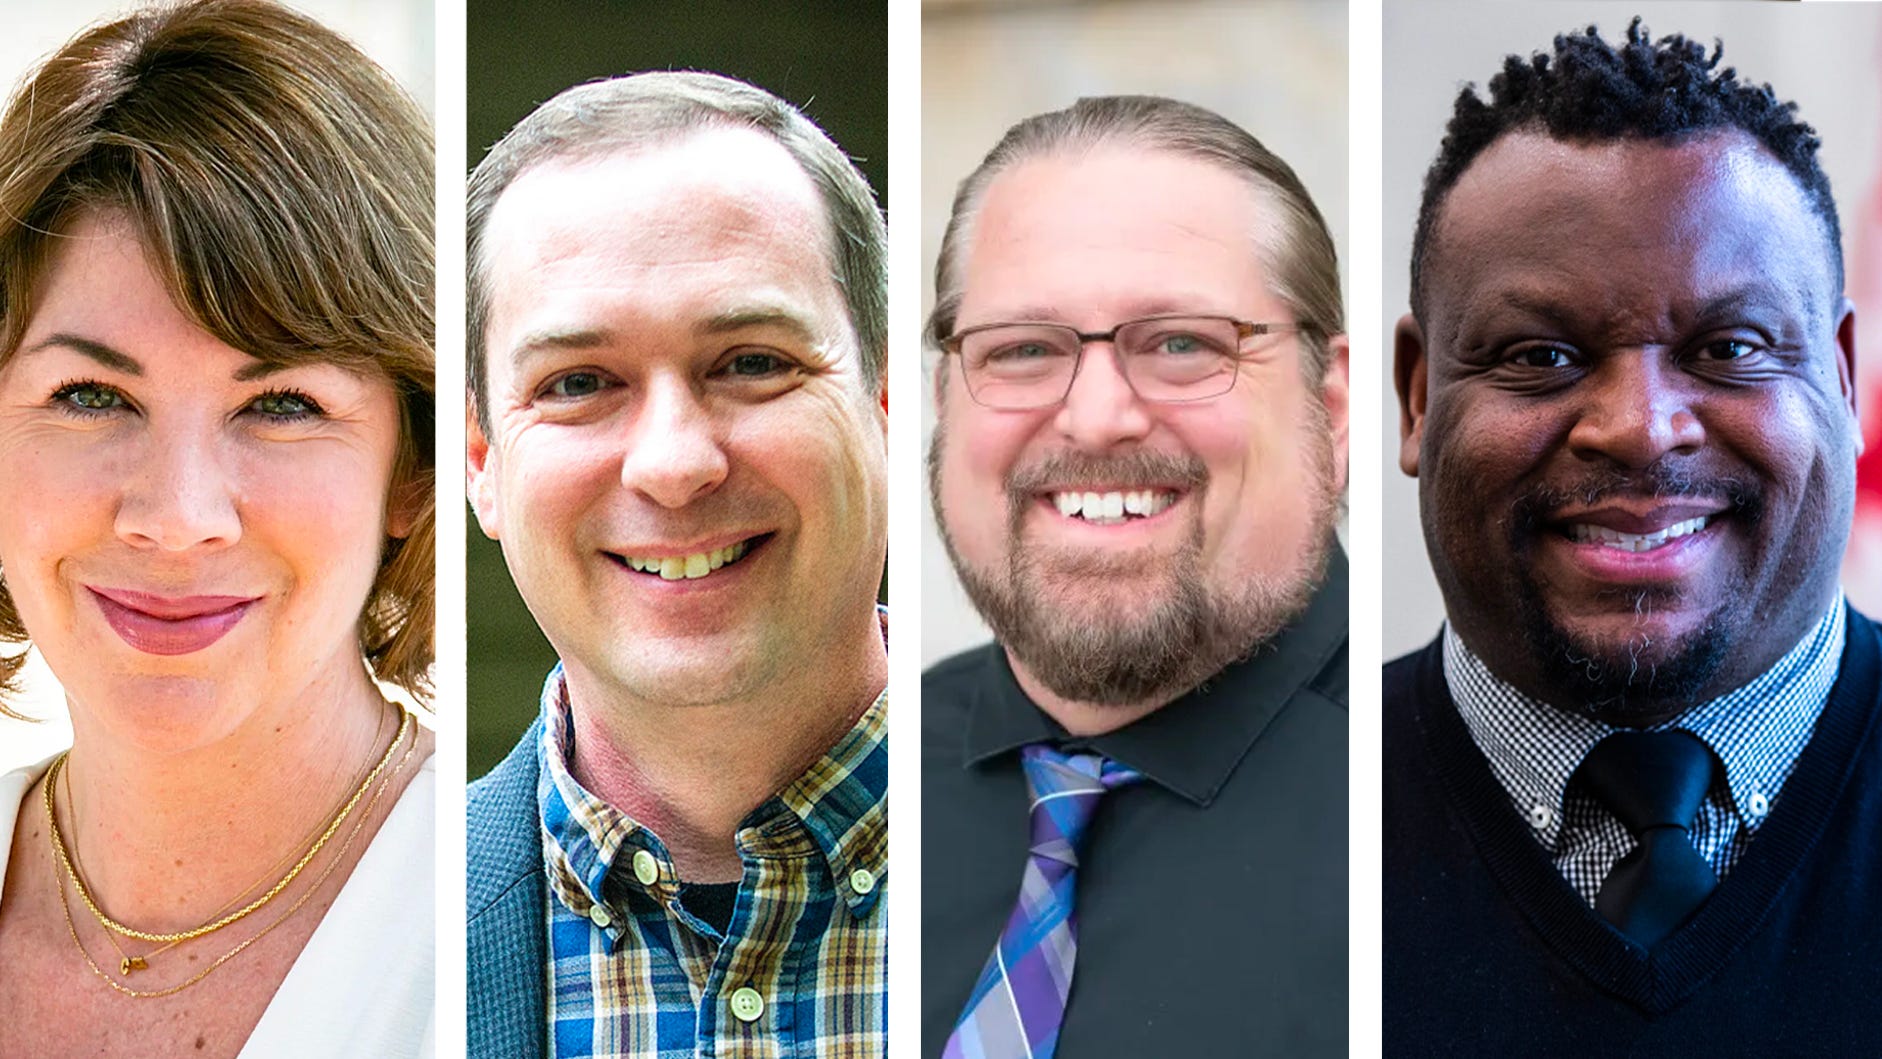 What to know about 4 candidates running for 3 Iowa City Council seats